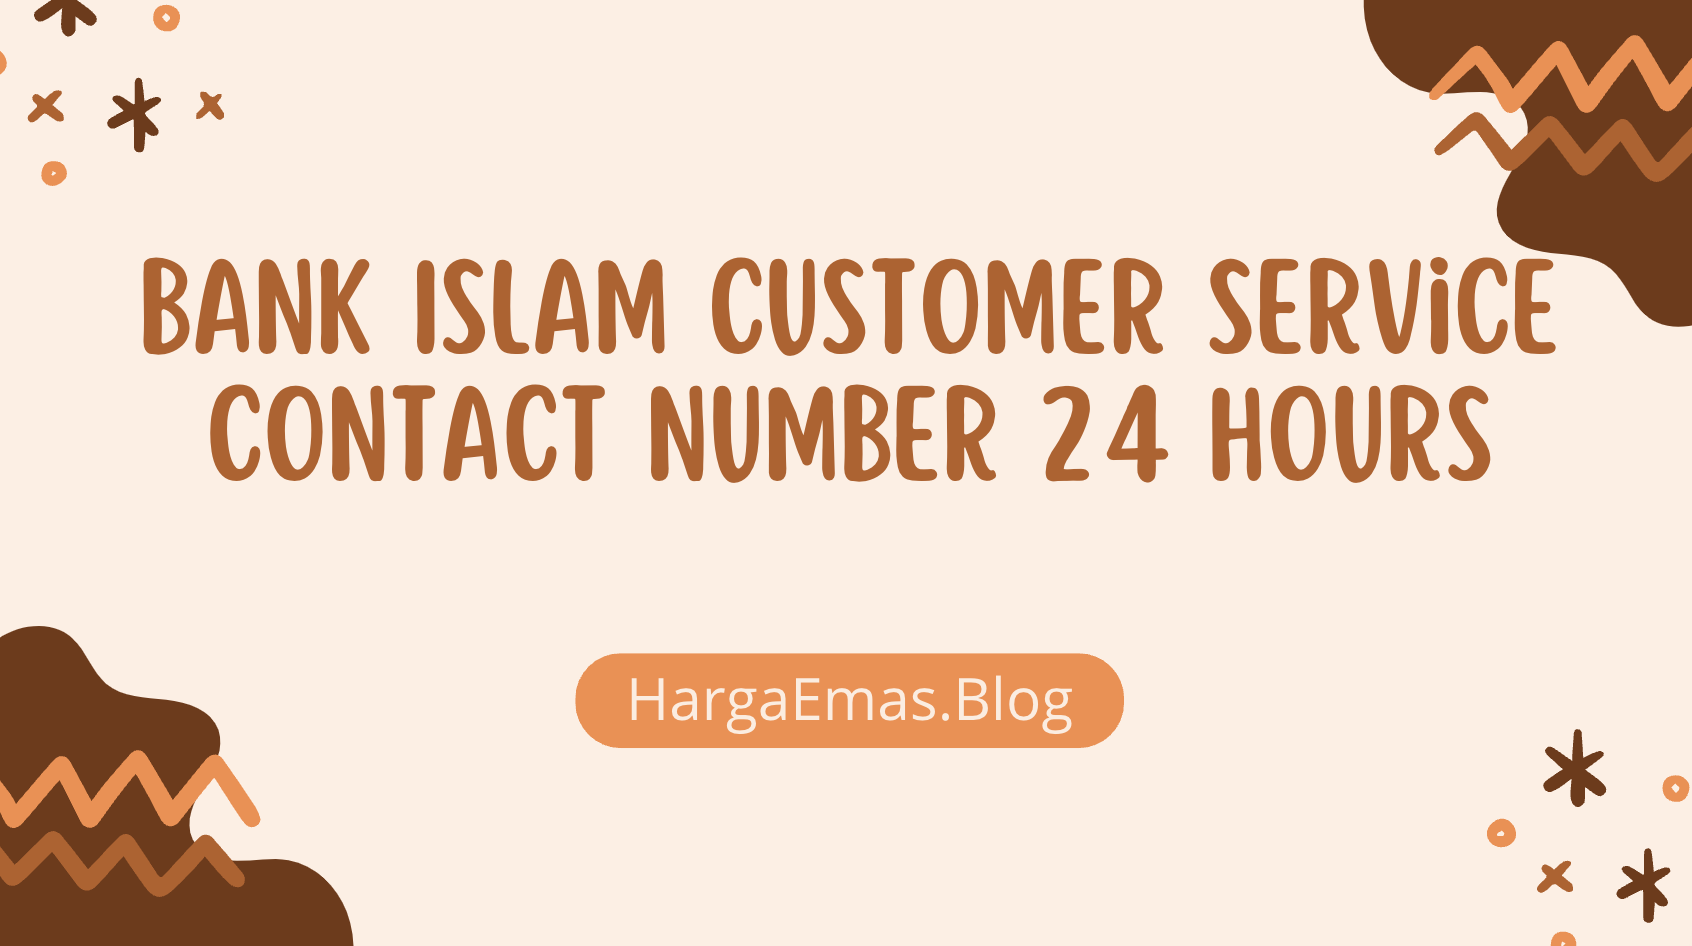 Bank Islam Customer Service Contact Number 24 Hours